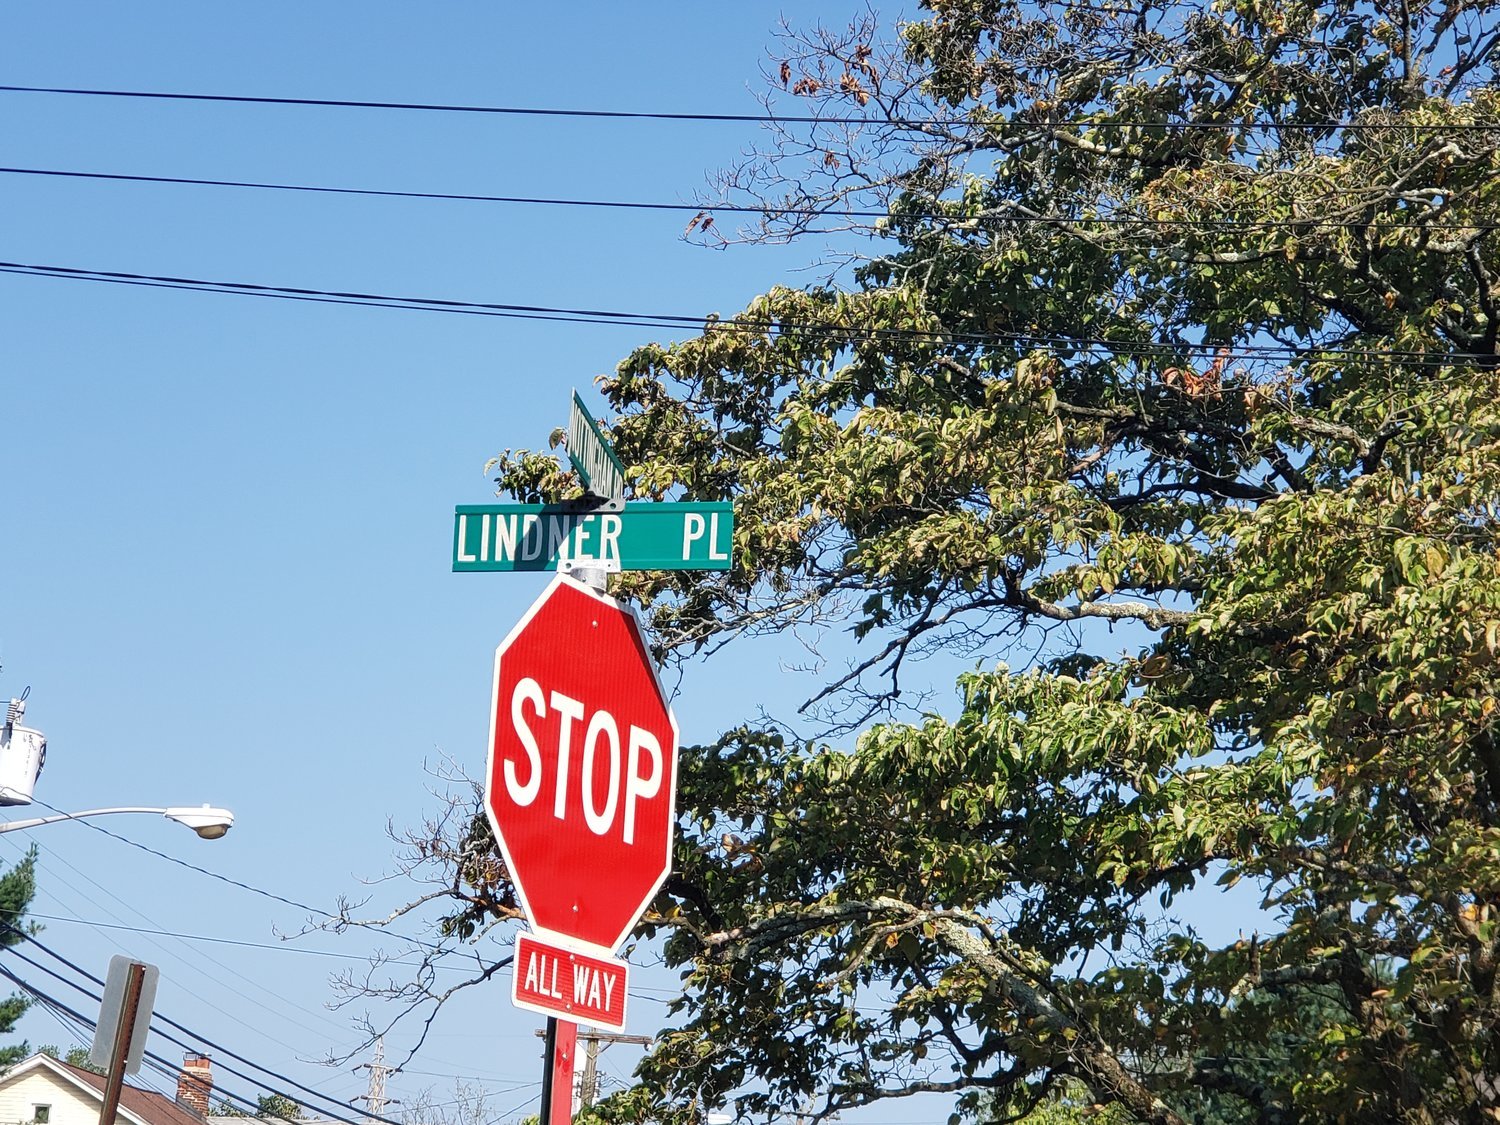 The streets signs for Lindner Place, originally named for a prominent member of the Ku Klux Klan, will soon be replaced by signs bearing the name “Acorn Way.”